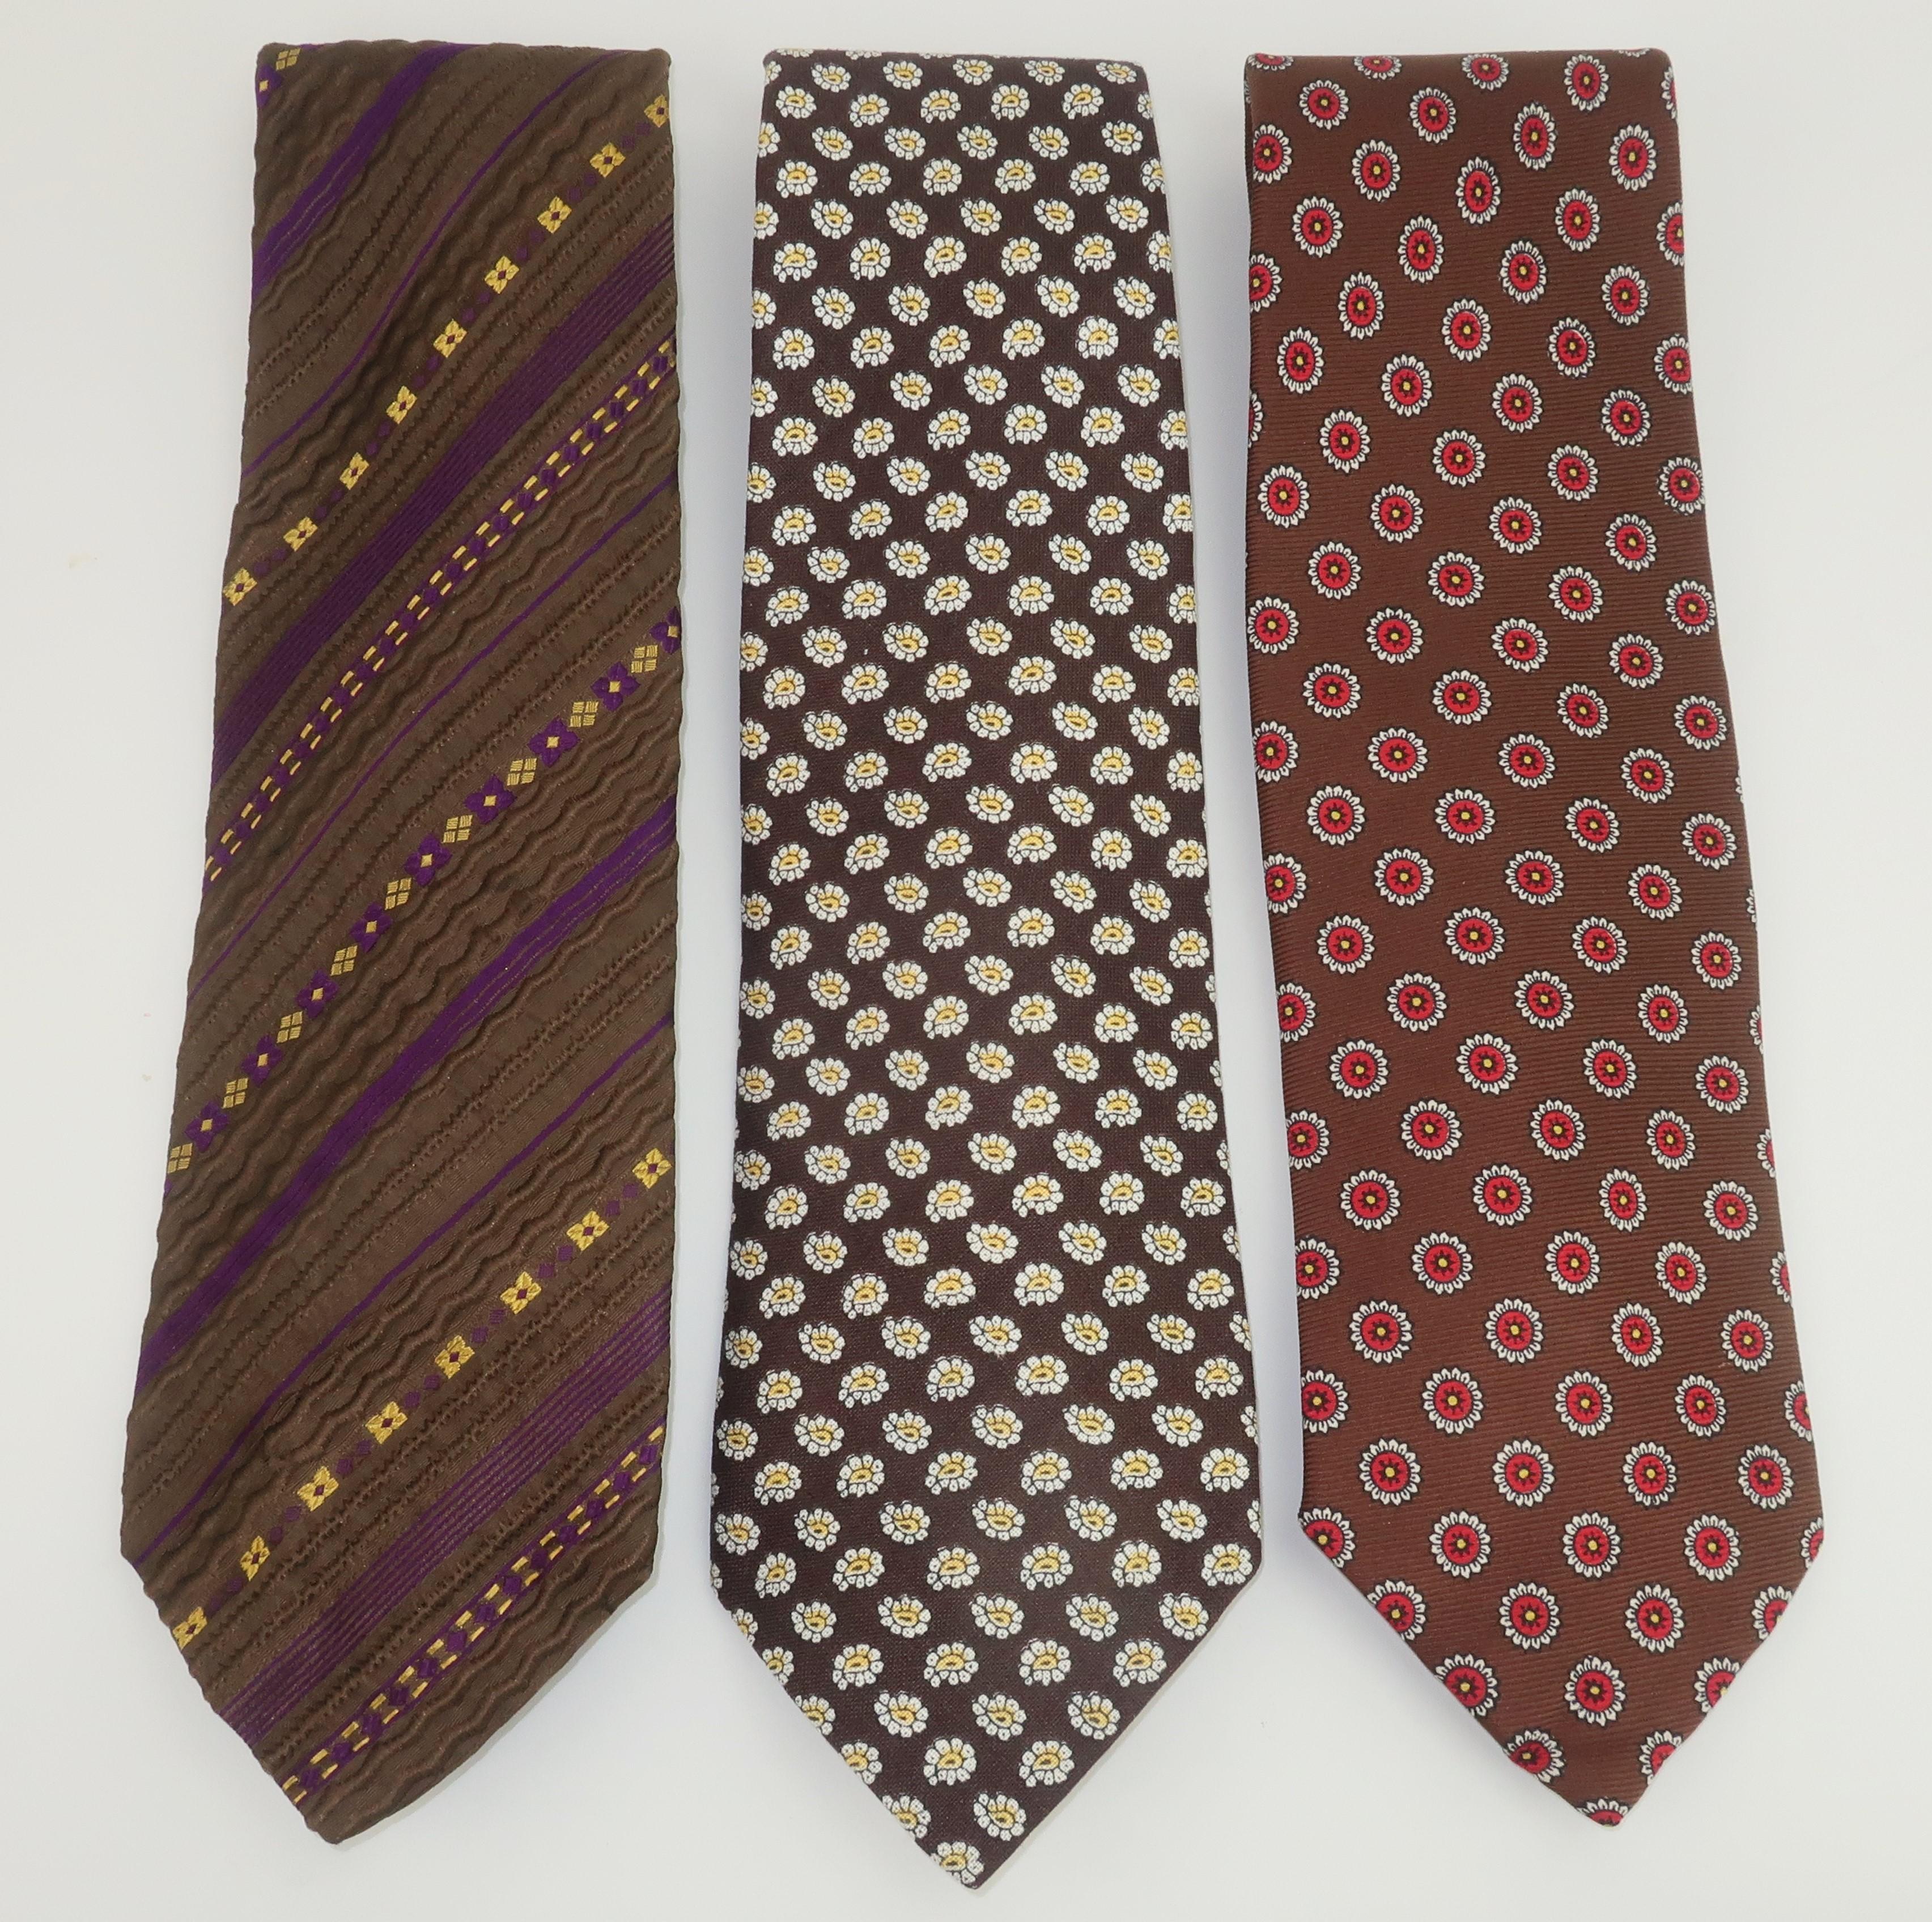 Ralph Lauren started his career designing neckties ... the rest is history!  This collection of wide neckties from the early 1970's represent Lauren's iconic American style.  All three ties are designed in brown silk fabrics with a touch of yellow